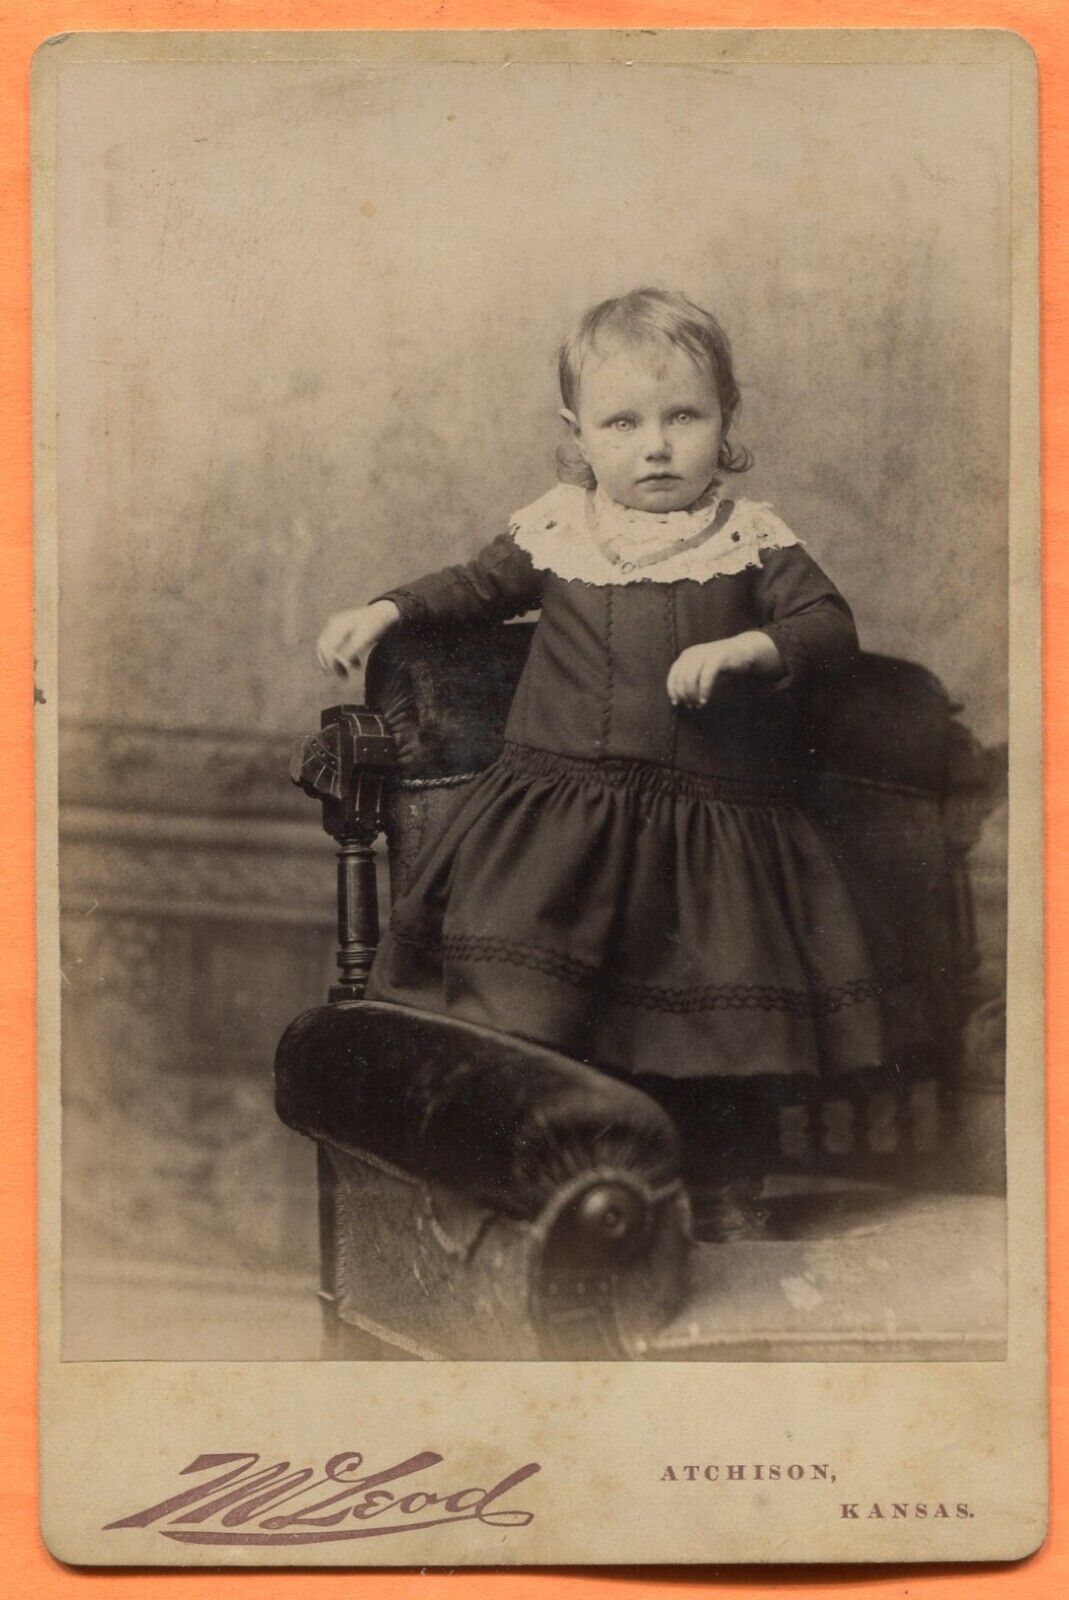 Atchison, KS, Portrait of a Toddler, by McLeod, circa 1880s